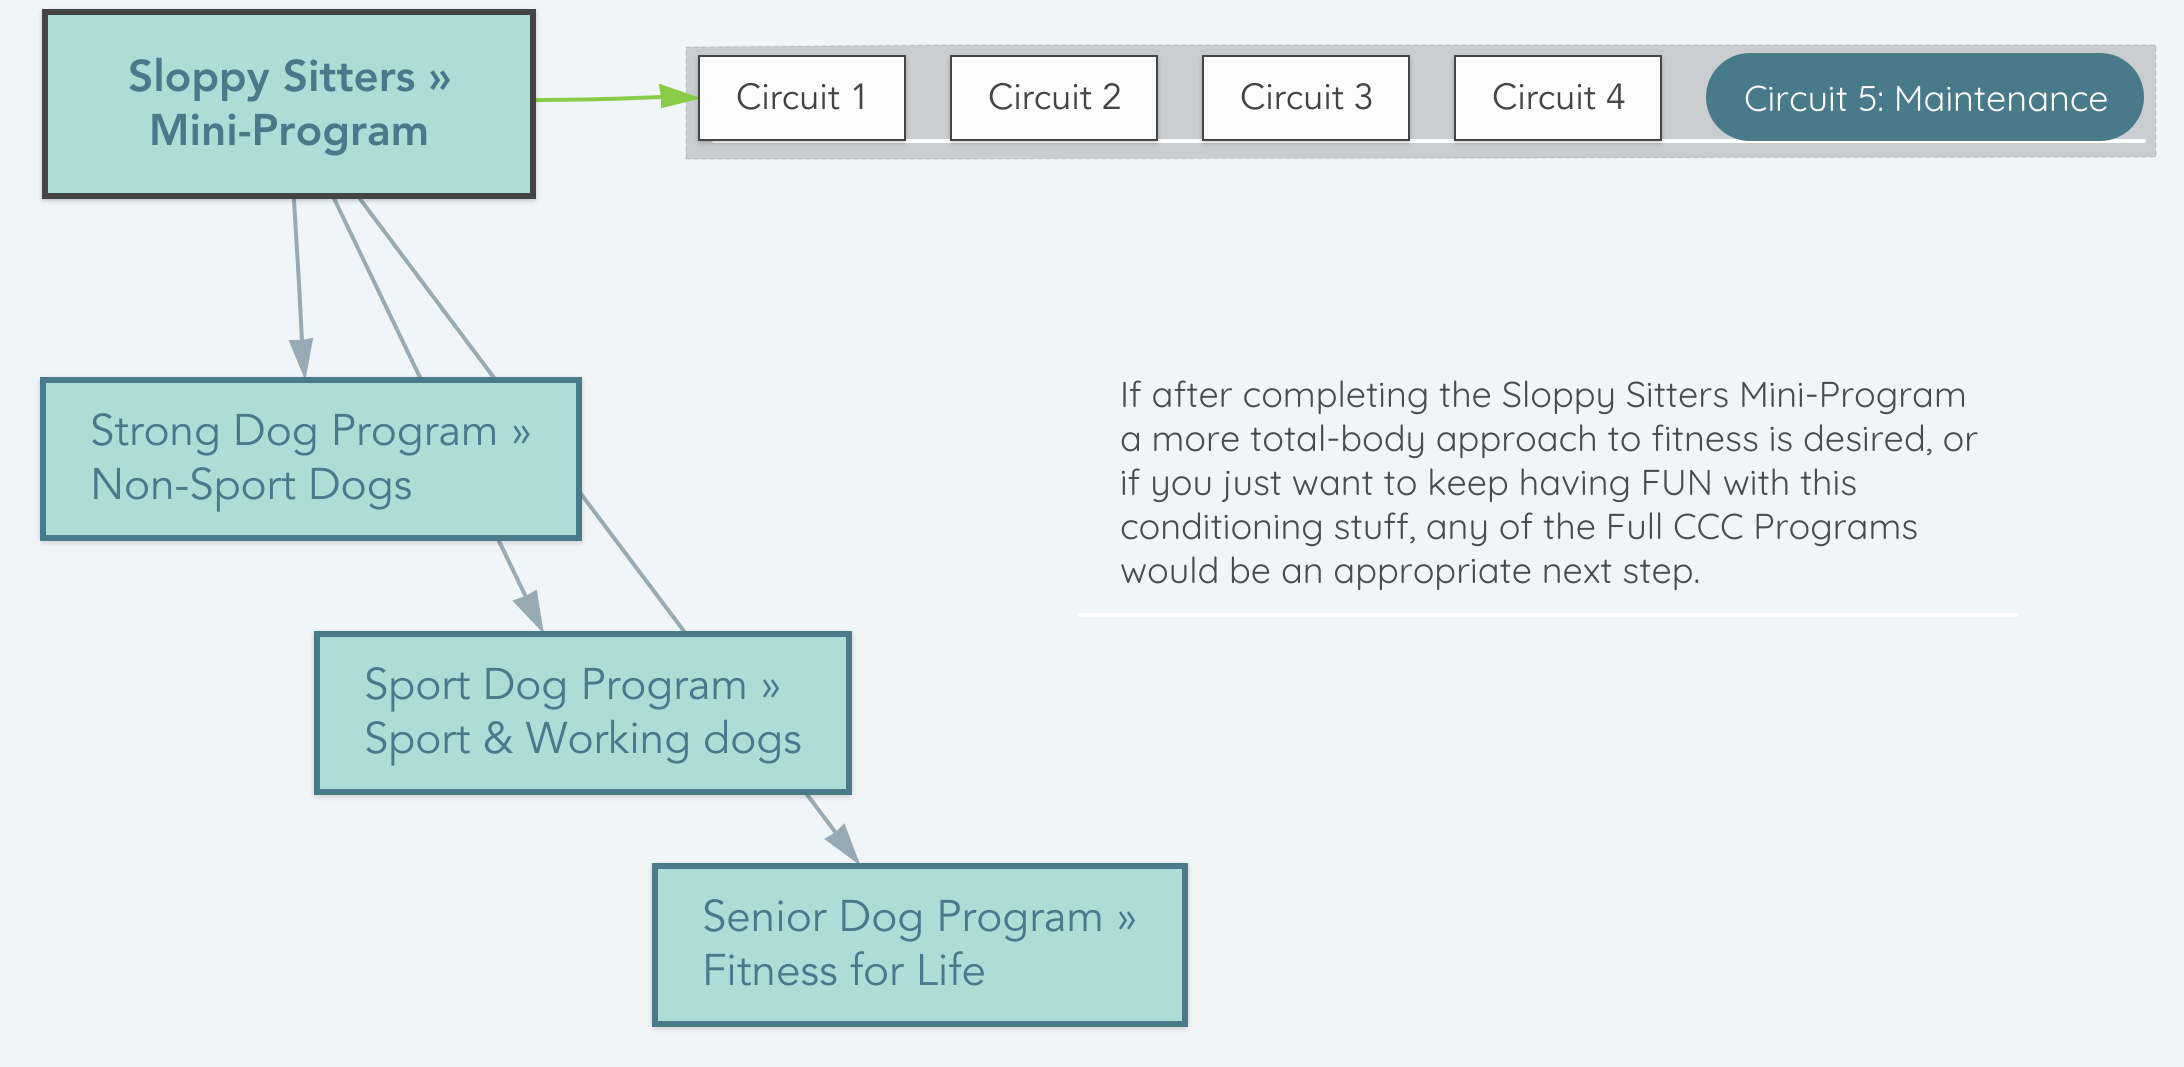 Graphic showing the progression through the Sloppy Sitters Mini-Program